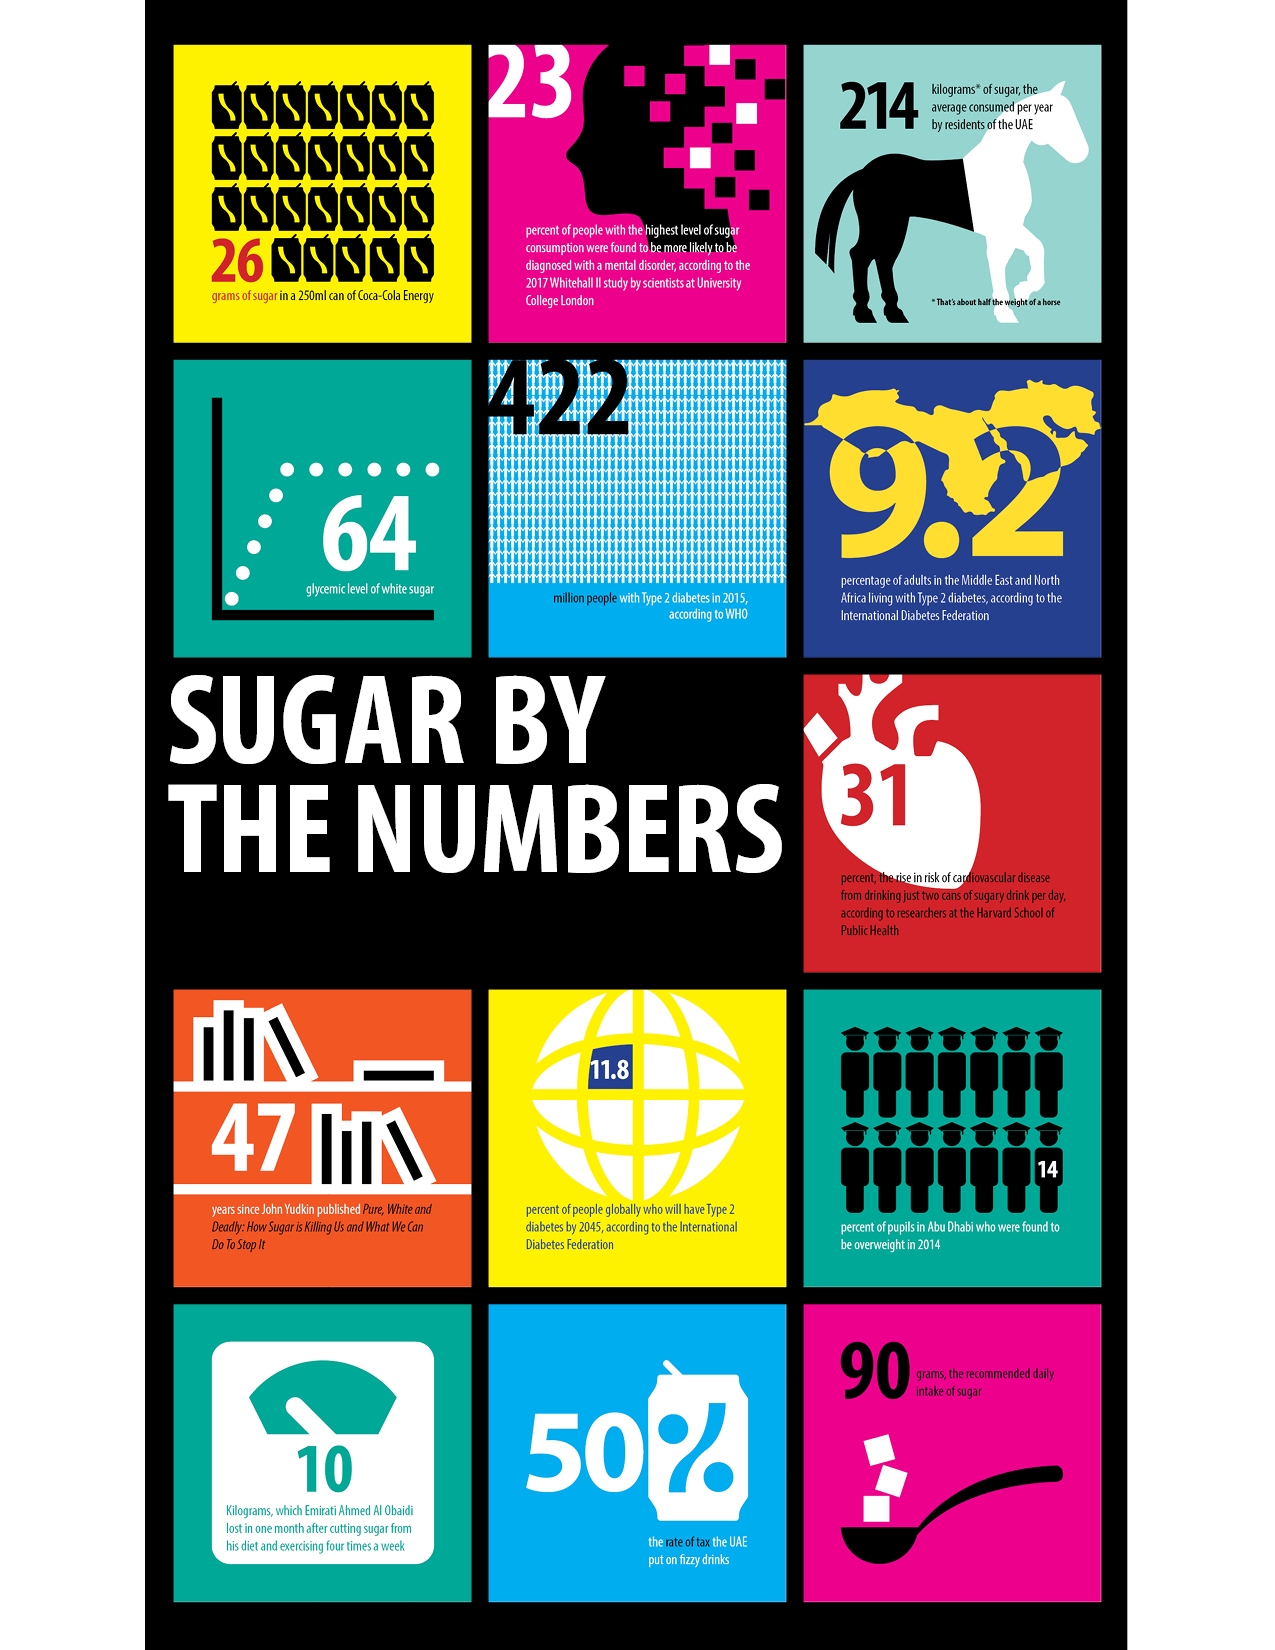 This is your body on sugar